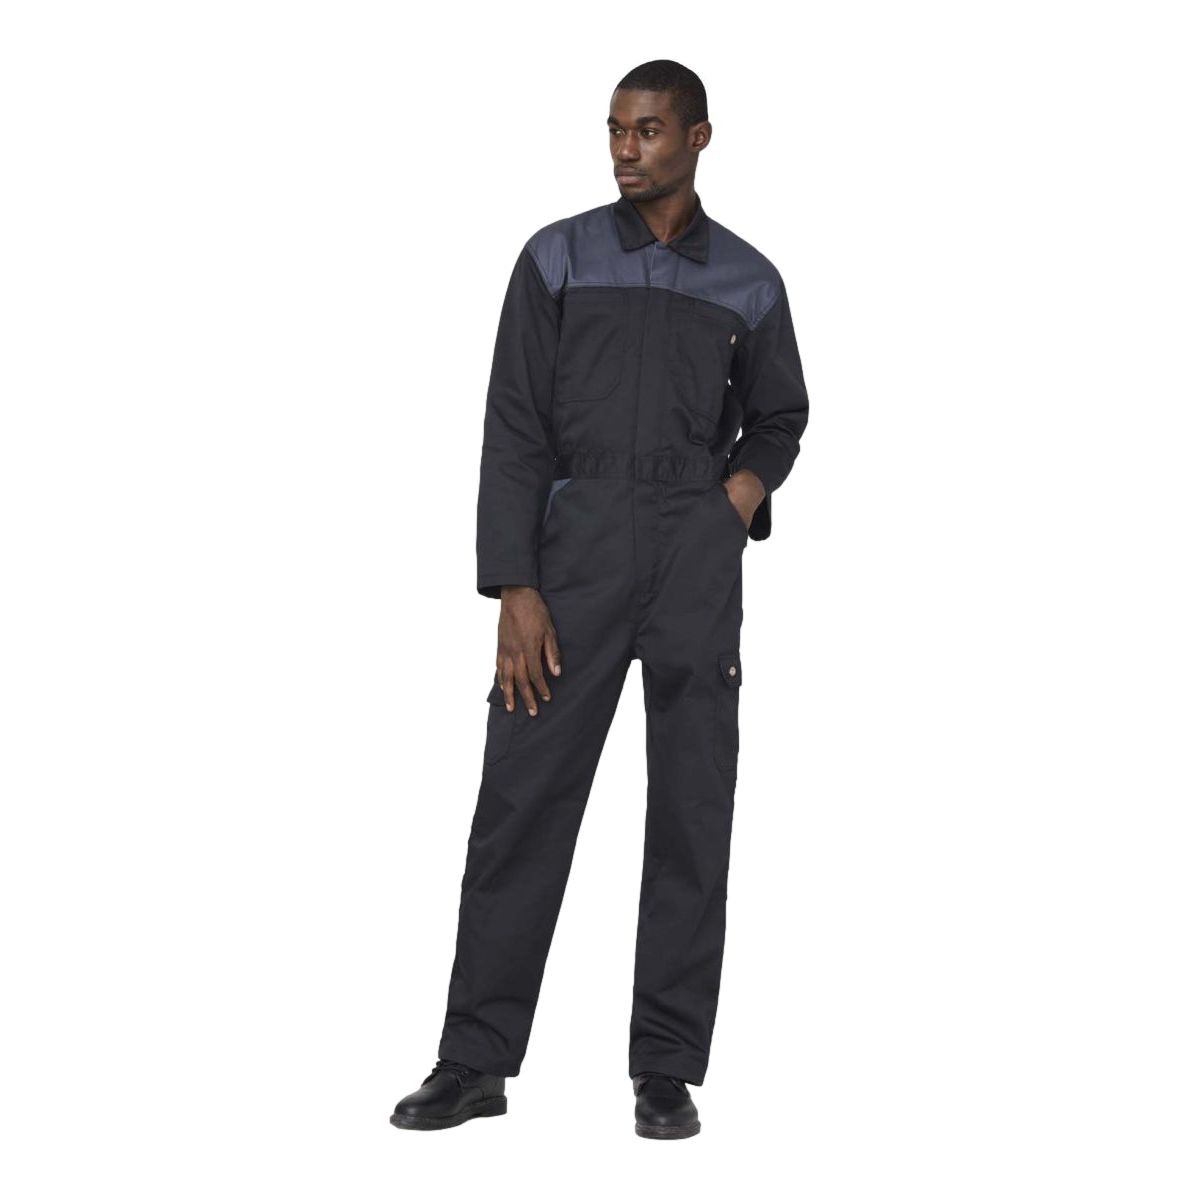 Combinaison Everyday Gris noir - Dickies - Taille S 2